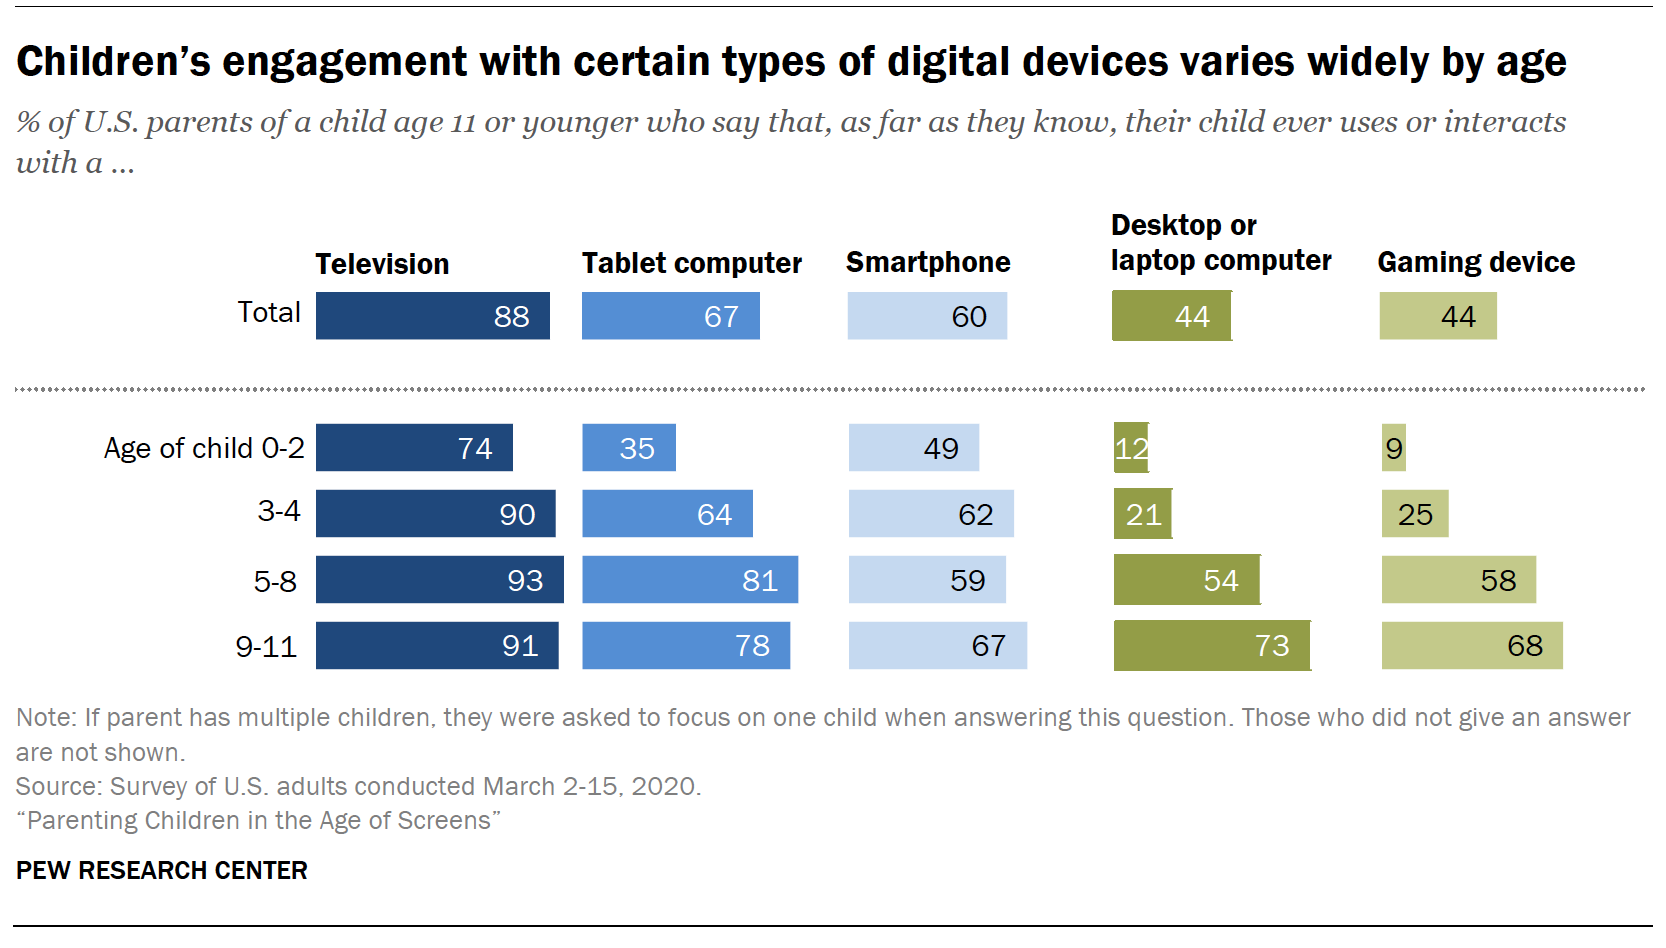 Children's engagement with certain types of digital devices varies widely by age.